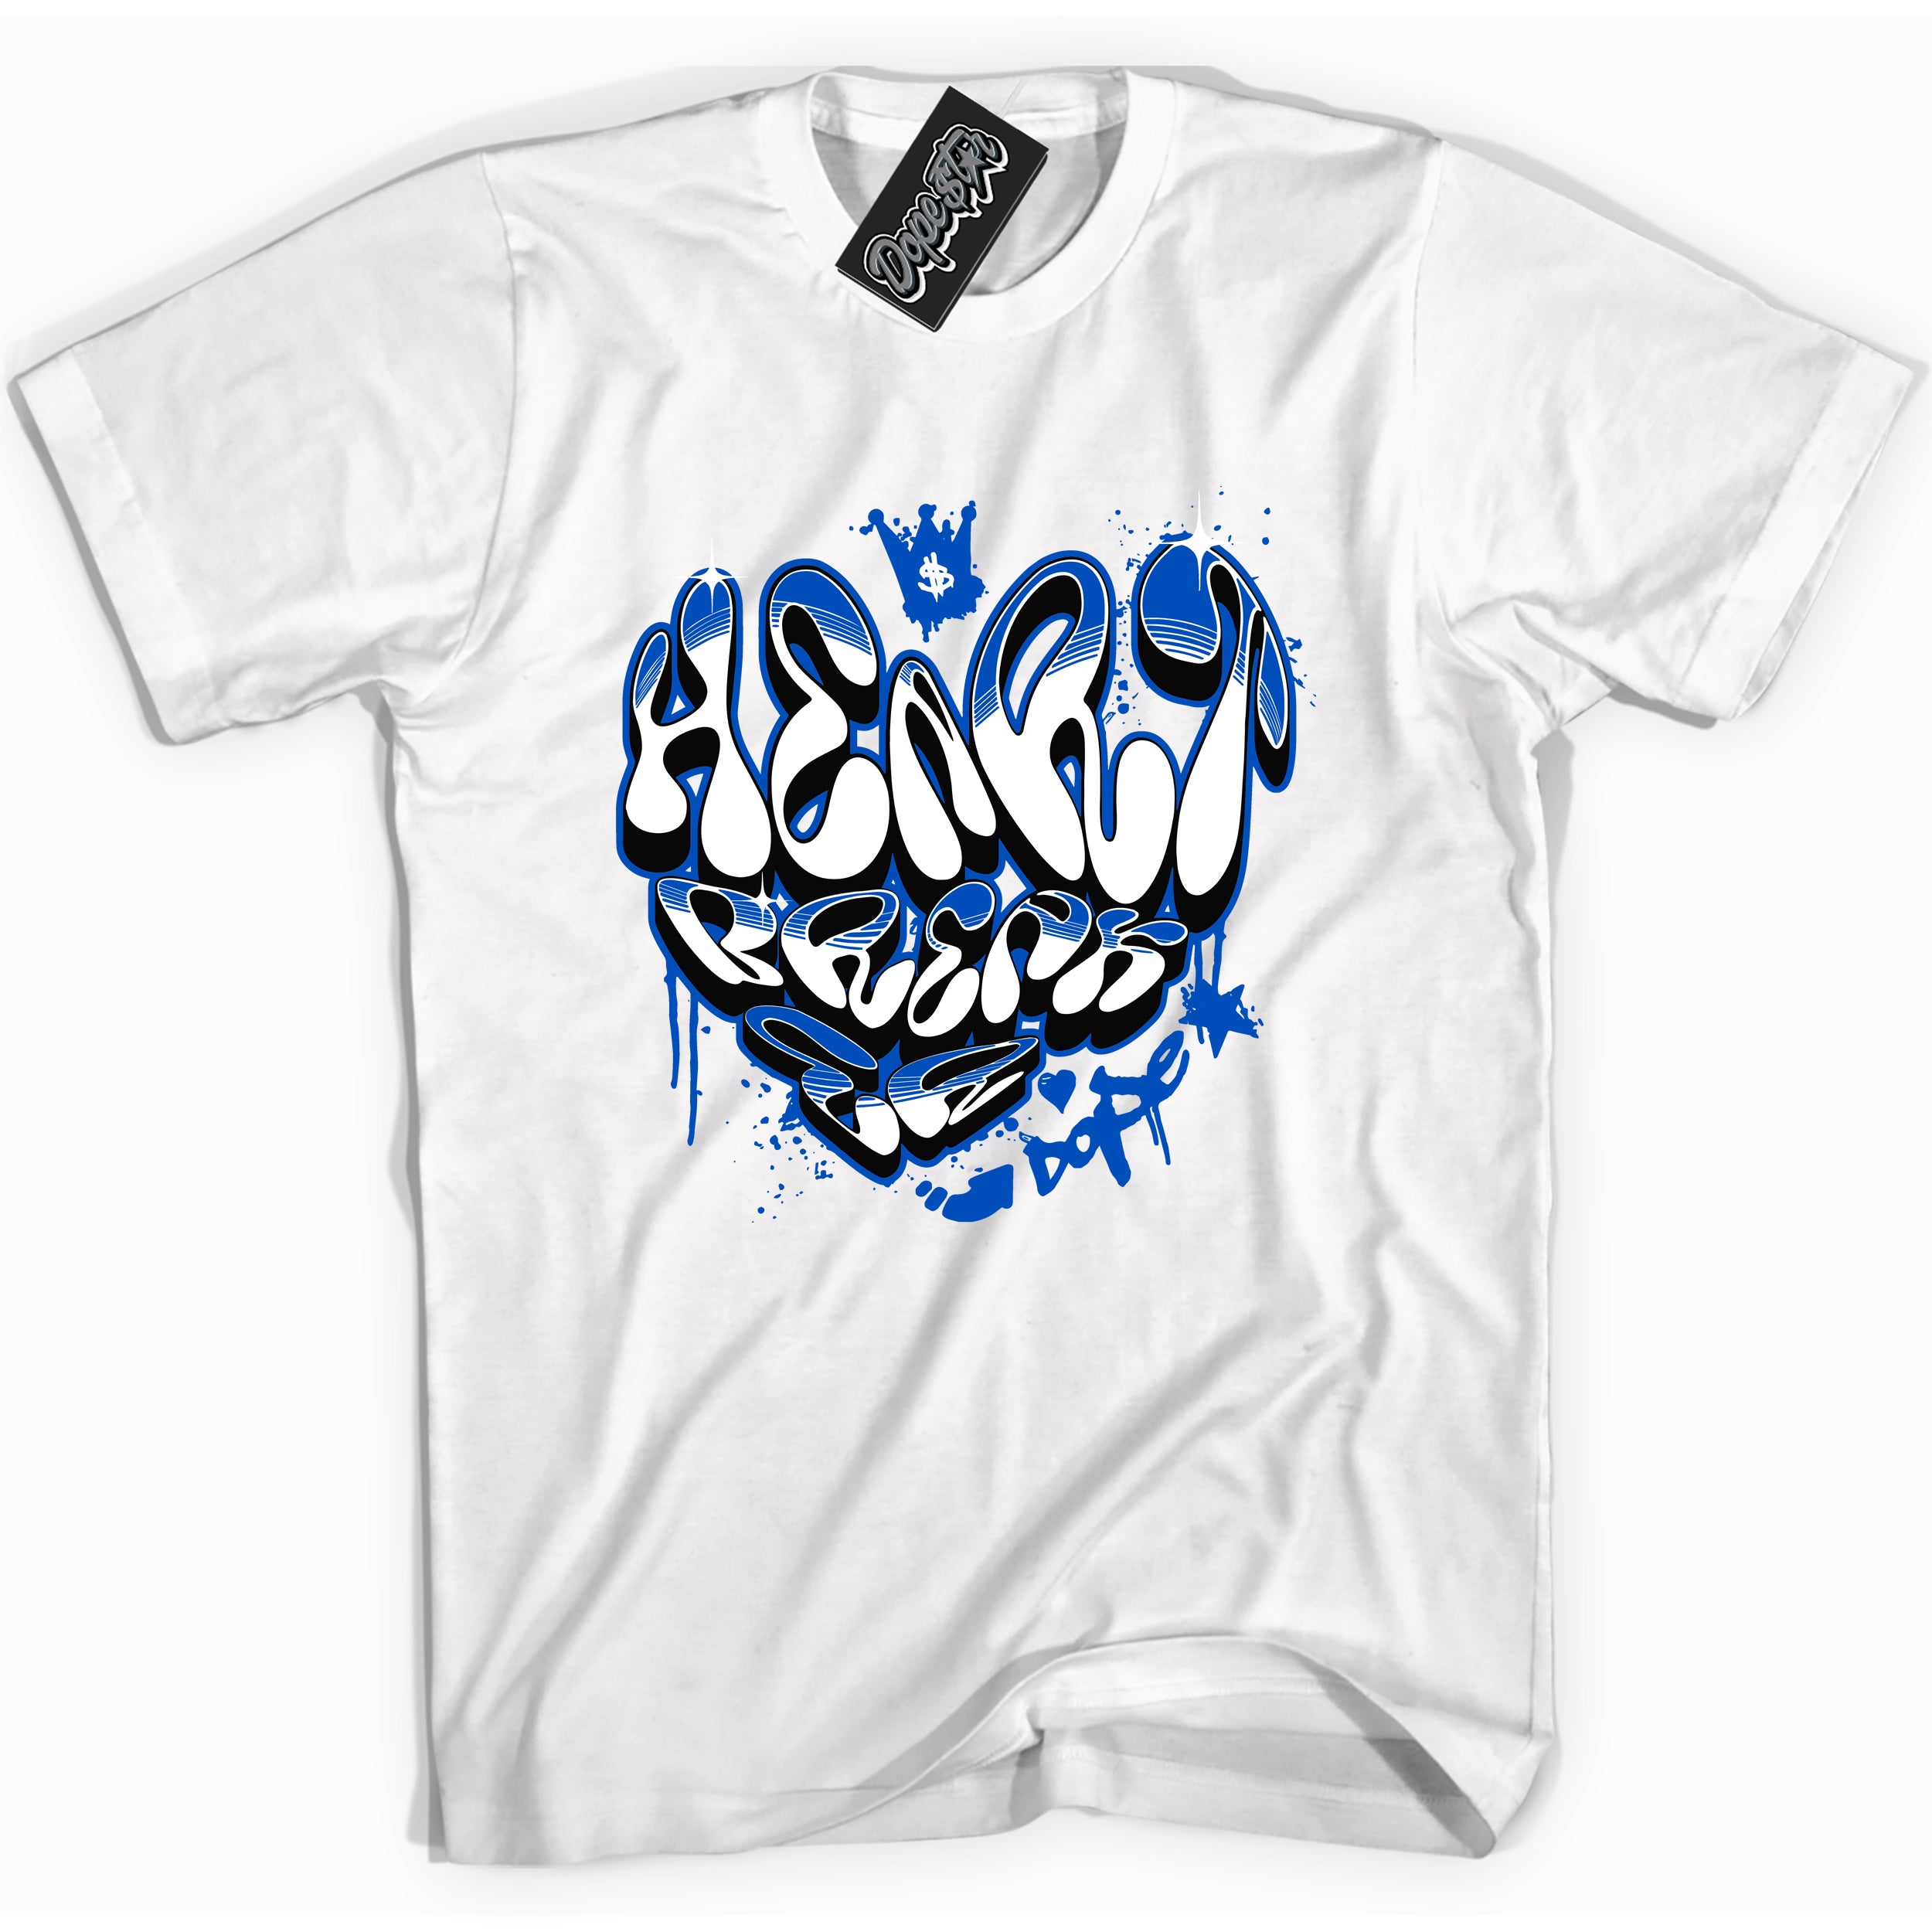 Cool White graphic tee with Heartbreaker Graffiti print, that perfectly matches OG Royal Reimagined 1s sneakers 